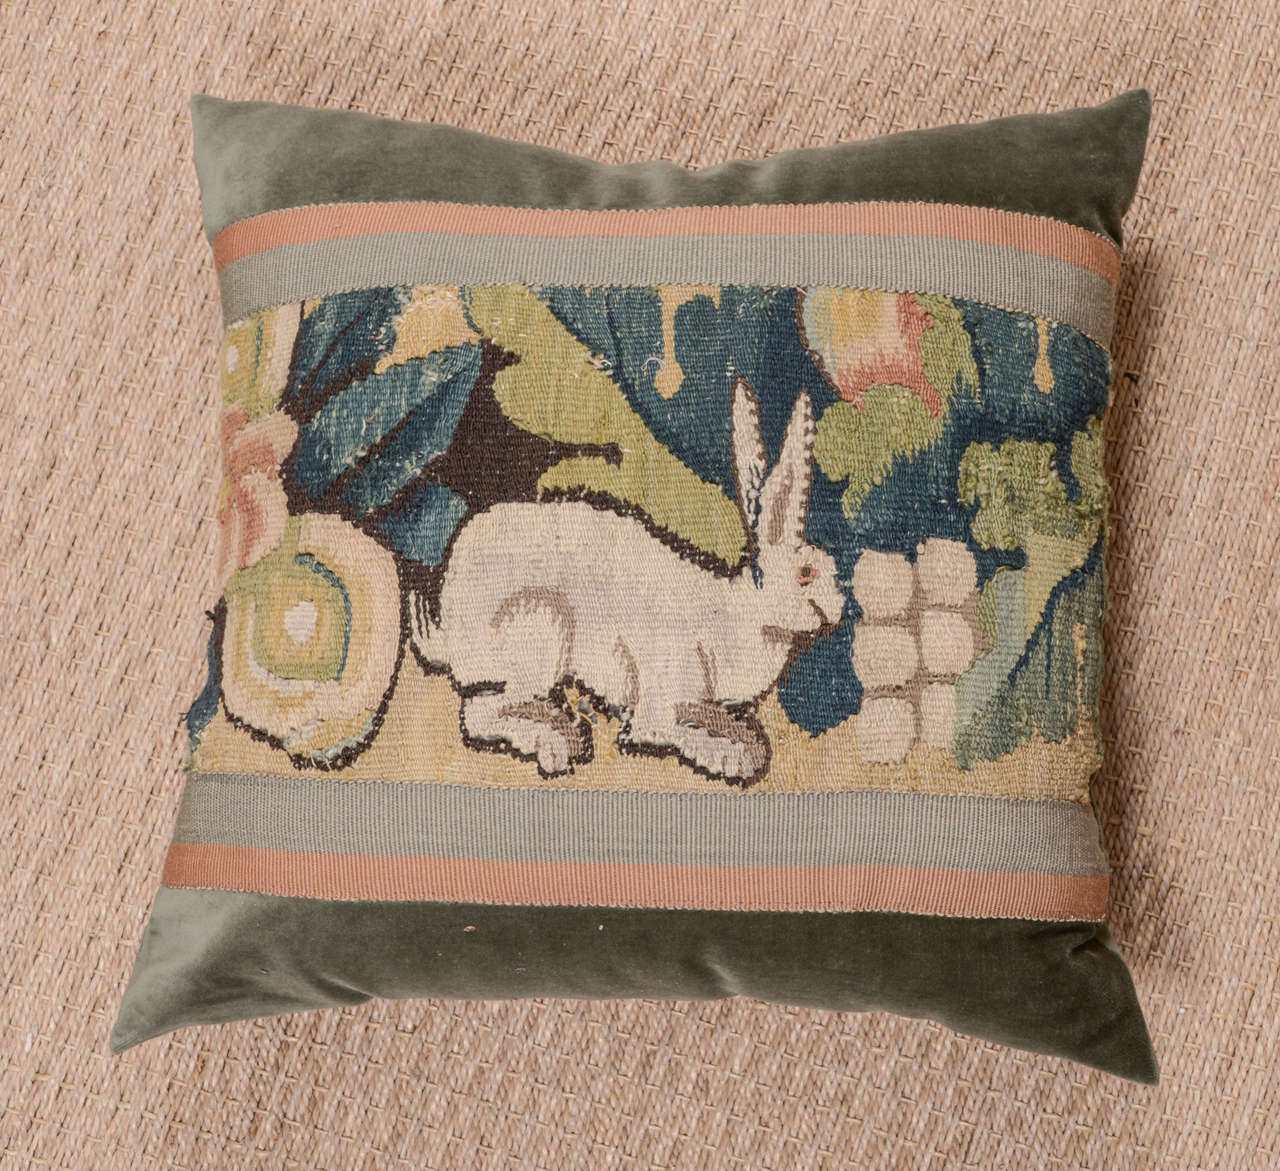 Antique tapestry fragment pillow constructed using celadon velvet. Tapestry is framed with a rose and taupe ribbons. Down filled.